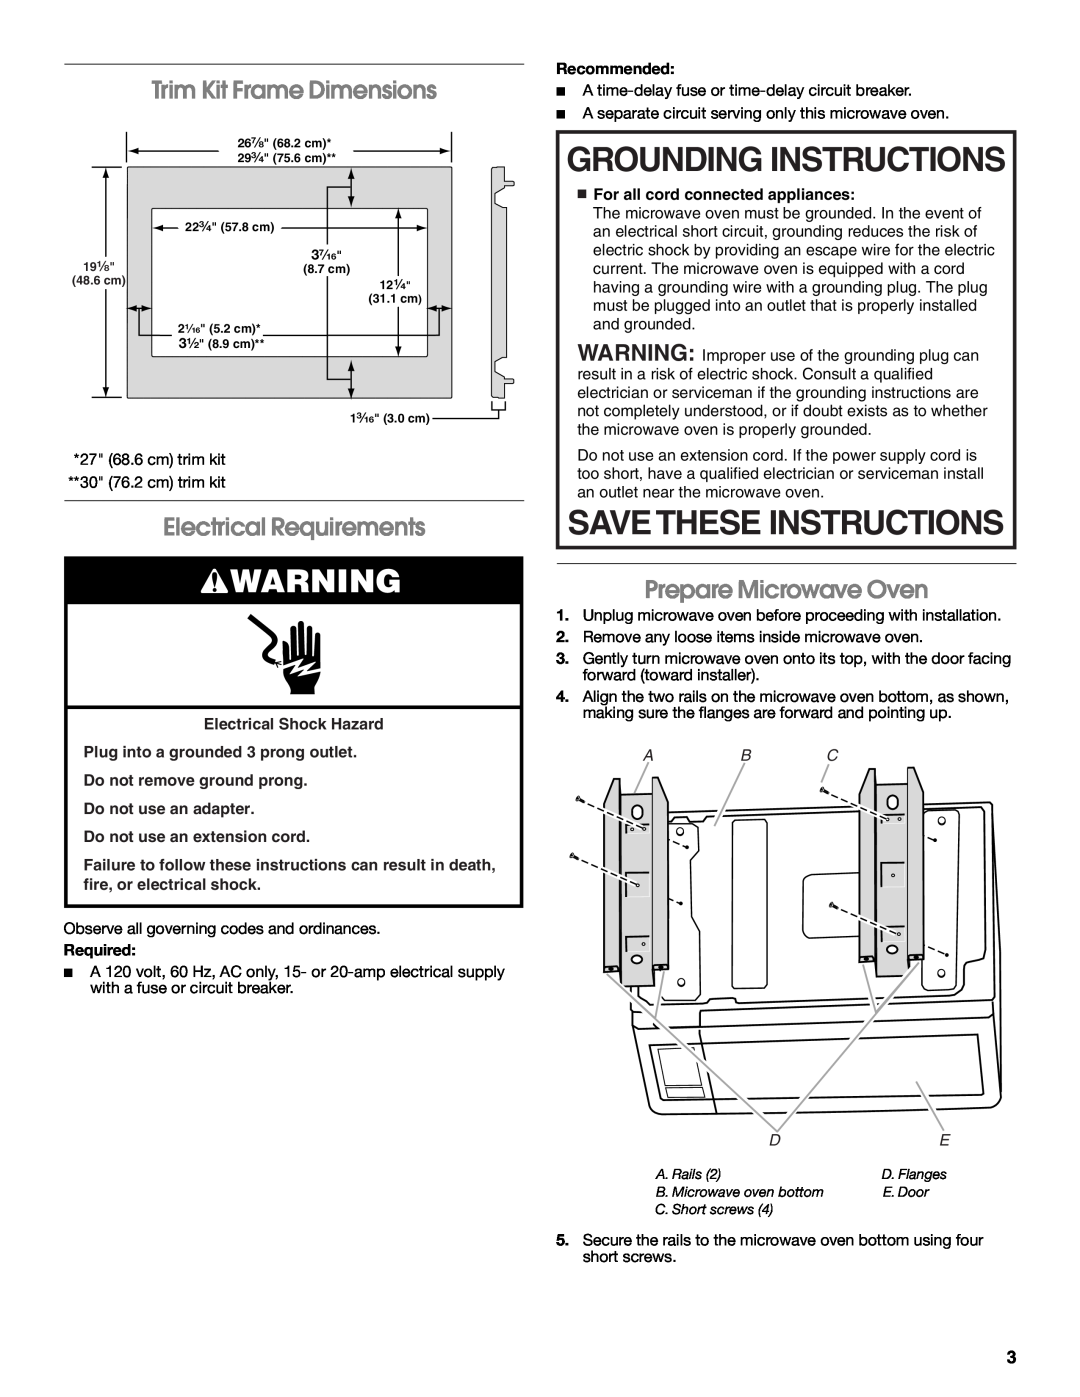 Whirlpool MK2167 Grounding Instructions, Savethese Instructions, Trim Kit Frame Dimensions, Electrical Requirements, Ab C 